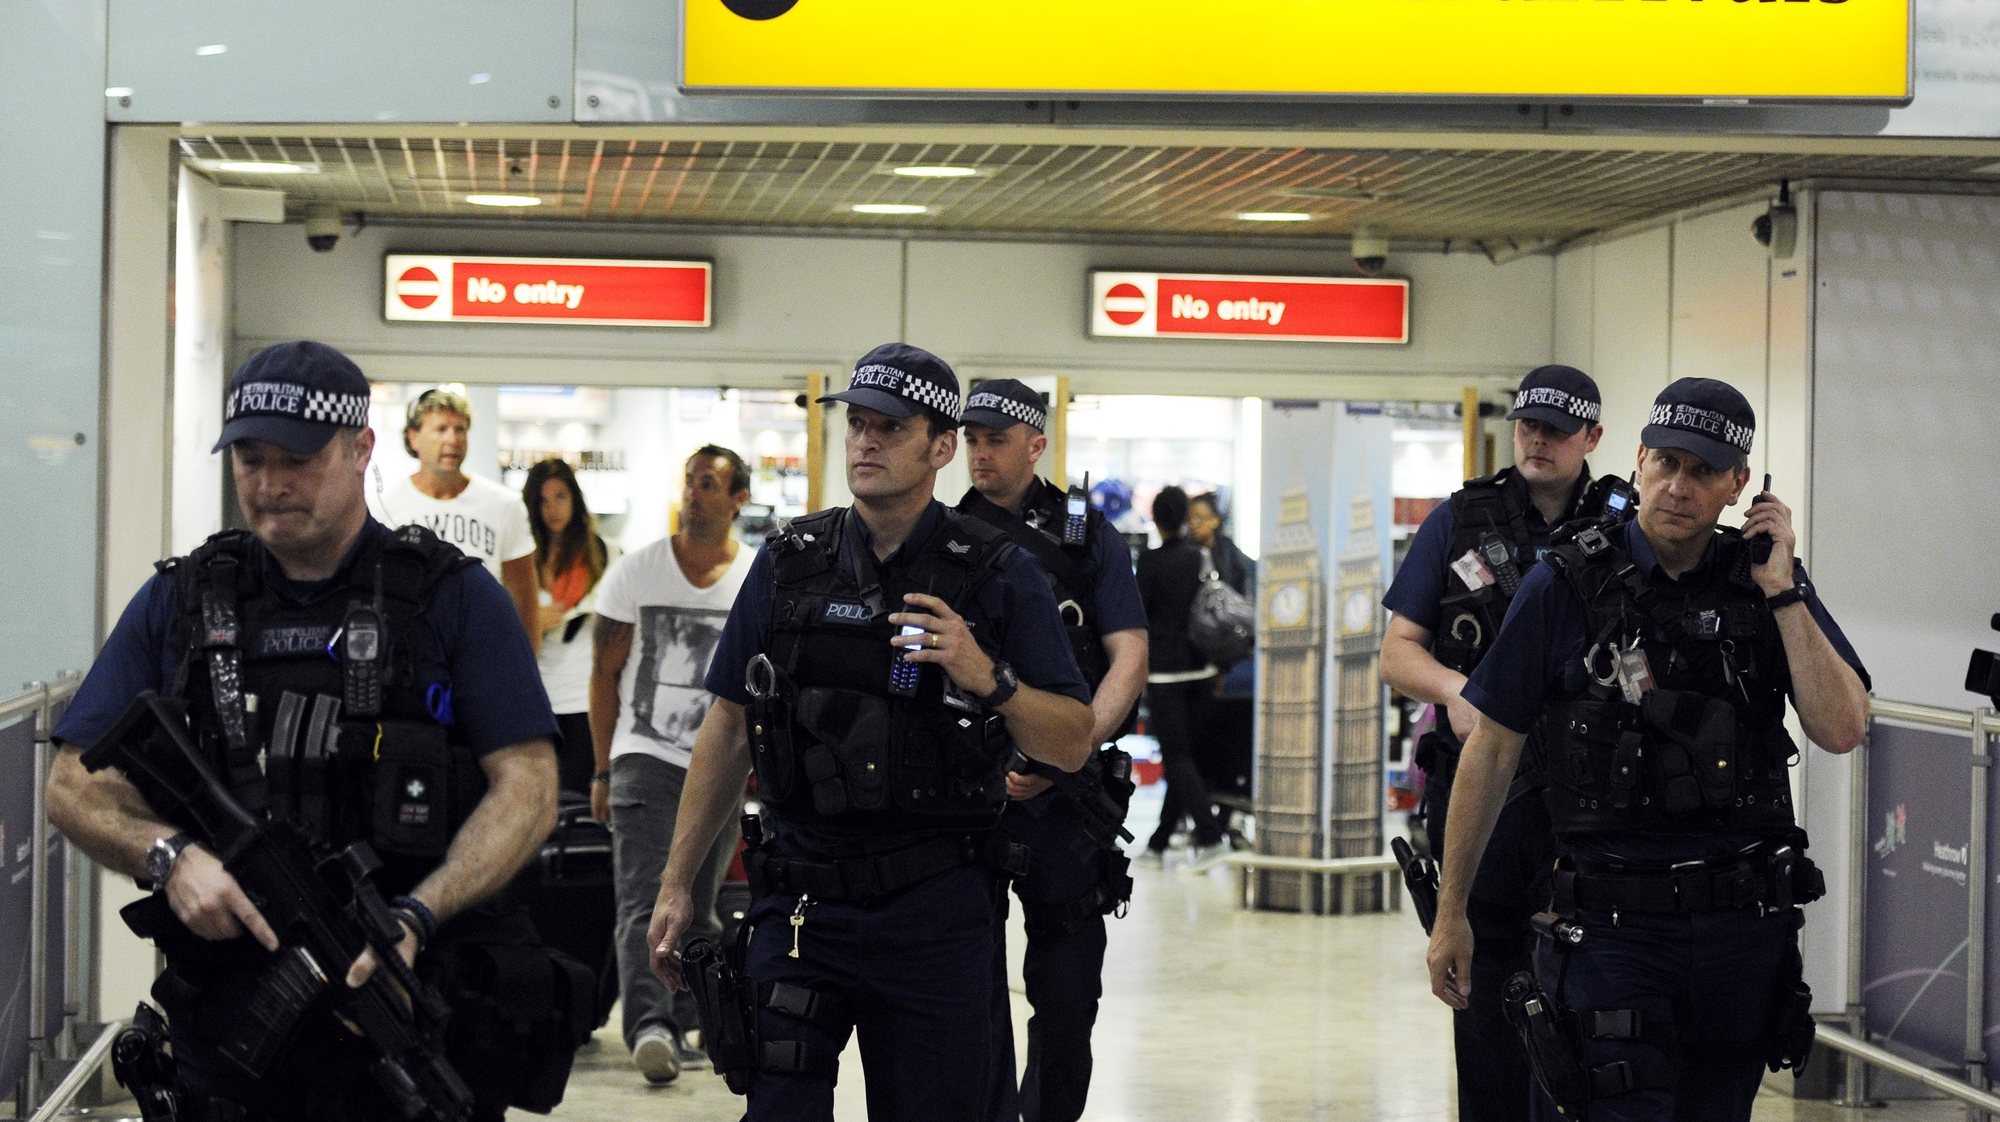 epa05798075 (FILE) -  A file picture dated 23 July 2012 shows British police on patrol at Heathrow airport in London, Britain. The British London Metropolitan Police reported that Counter Terrorism Command (SO15) detectives have arrested a man following his arrival at London Heathrow Airport on the afternoon of 16 February 207. The 36-year-old man was arrested on suspicion of preparation of terrorist acts (contrary section 5 Terrorism Act 2006). He has been taken into custody, under the Police and Criminal Evidence Act (PACE), at a west London police station where he remains at this time. Enquiries by detectives continue.  EPA/FACUNDO ARRIZABALAGA *** Local Caption *** 51459977